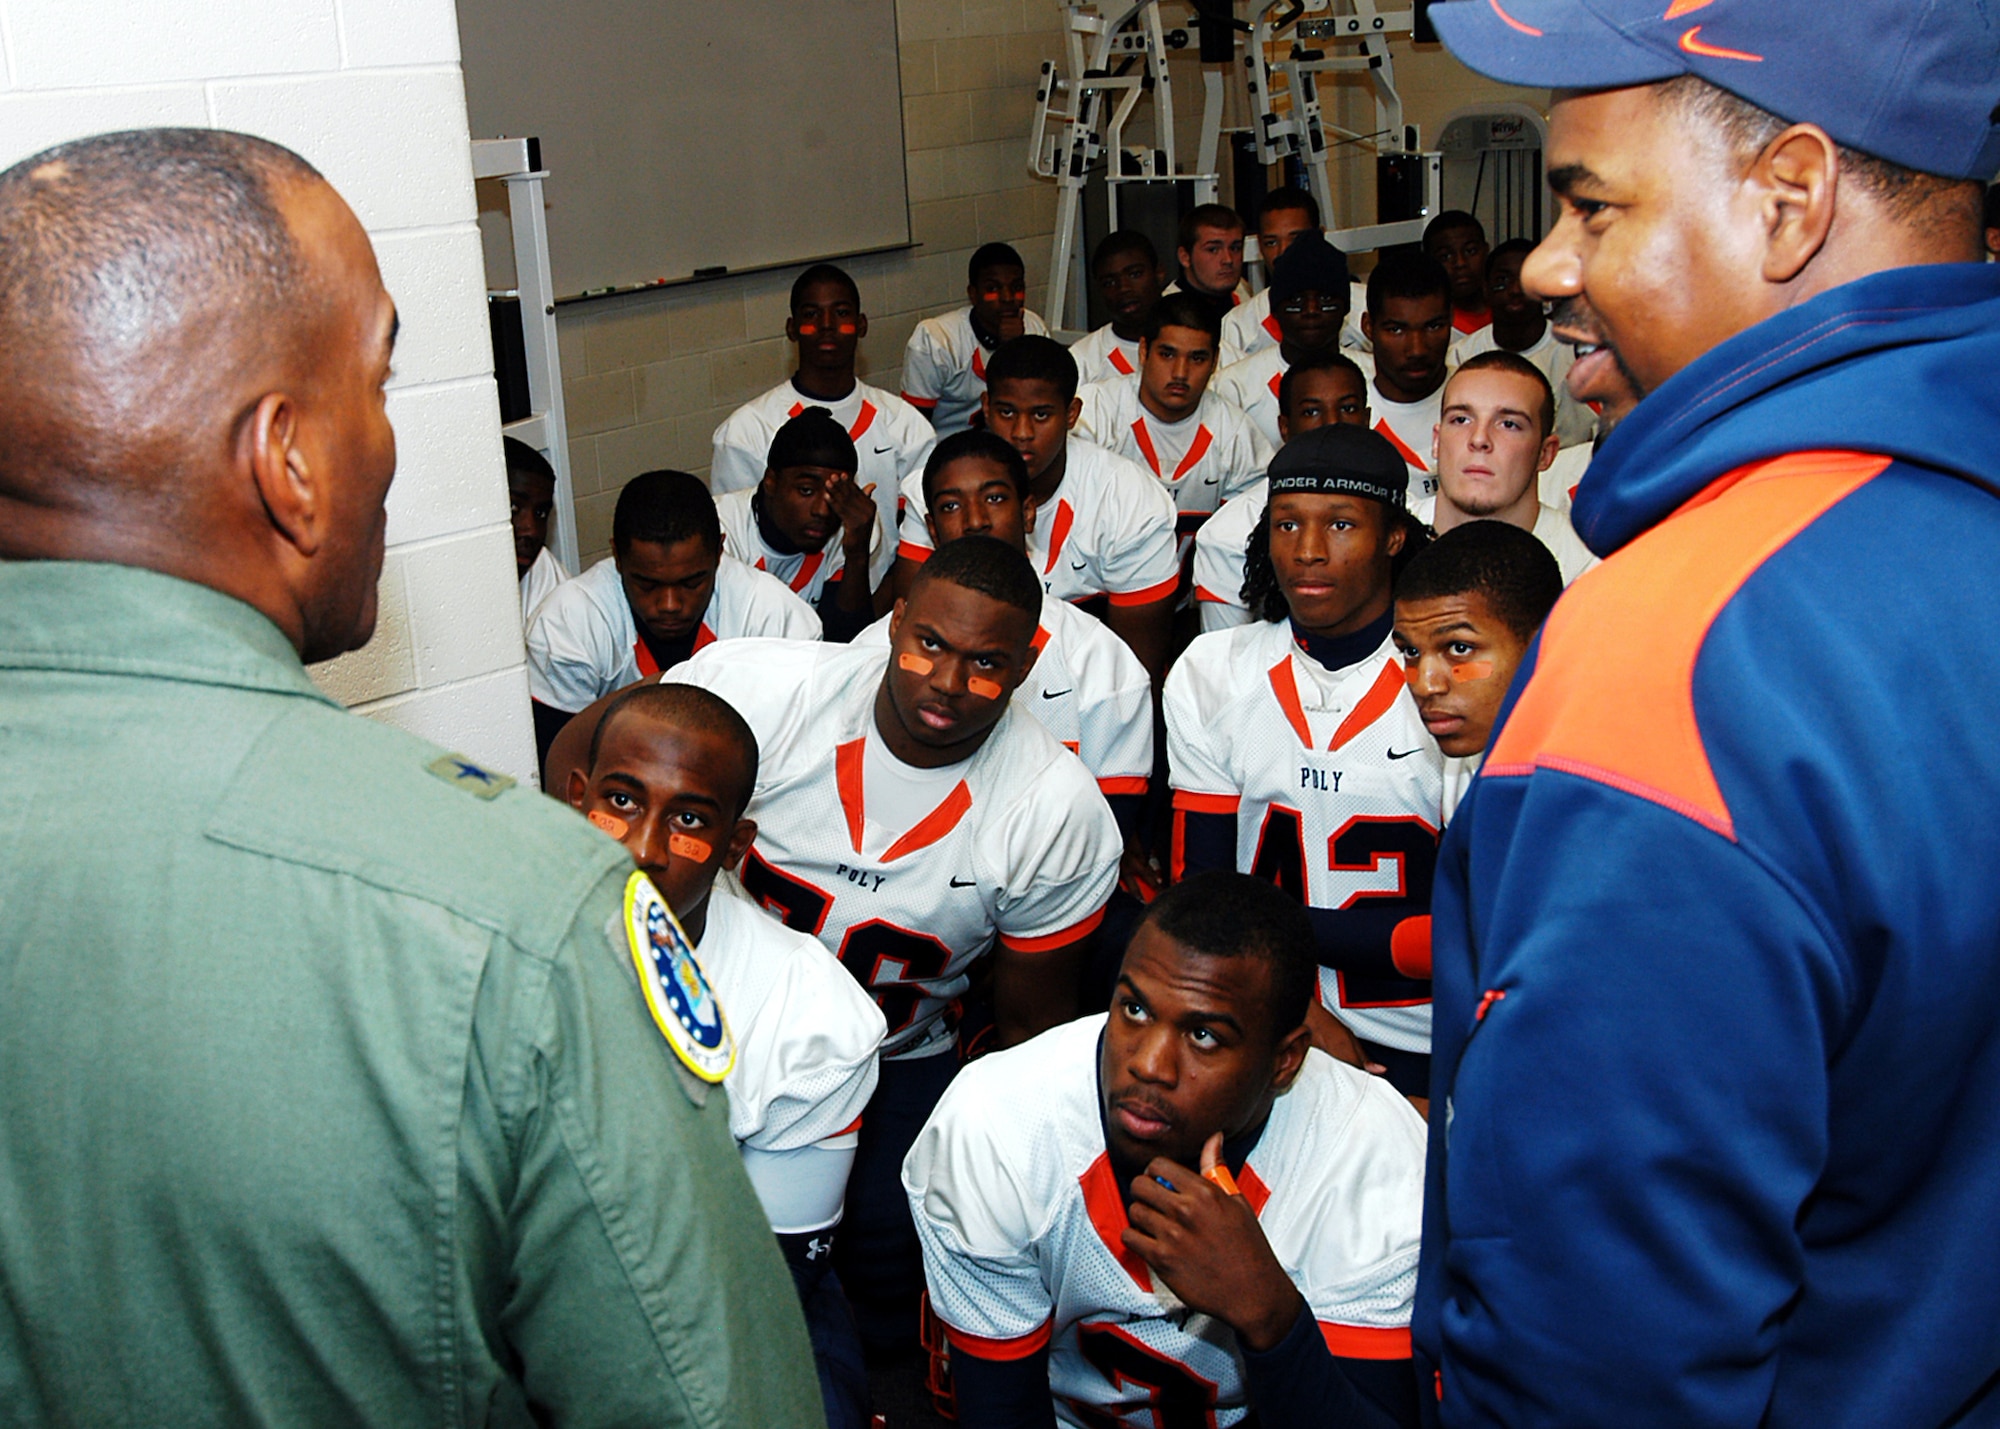 Air Force Recruiting Service Commander Brig. Gen. A.J. Stewart gives a pre-game pep talk to the Engineers Baltimore Polytechnic Institute high school’s football team, at M&T Bank Stadium Nov. 8. The Engineers were set to play its 119-year rival, the Baltimore City College high school Knights in the Air Force-sponsored iHigh Great American Rivalry Series. A Class of 1977 BPI alumni and varsity football wide receiver, General Stewart shared inspirational words with both teams before the game, and he presented one of two $500 college scholarships to Engineers player Arnold Farmer. BPI won the game 16-13. (U.S. Air Force photo/Tech. Sgt. Jennifer Lindsey)